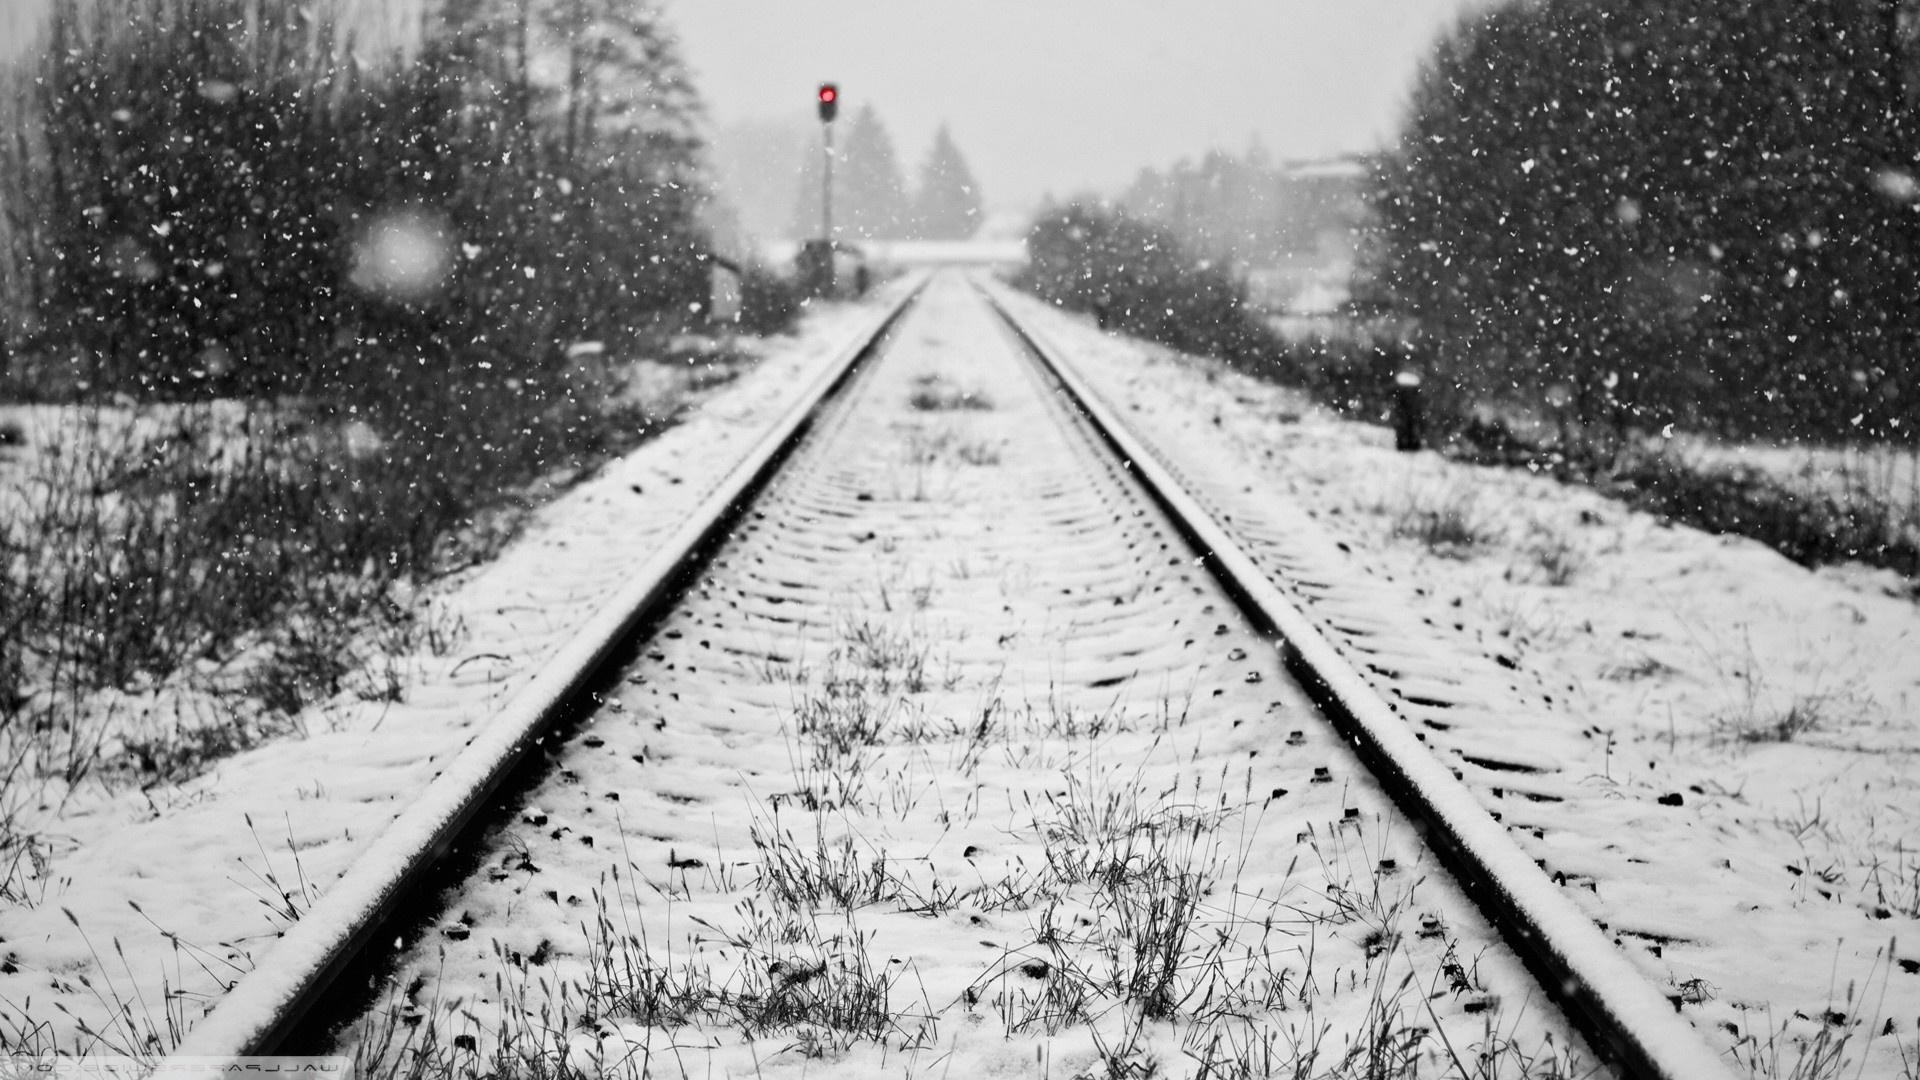 General 1920x1080 railway snow winter snowing overcast cold outdoors